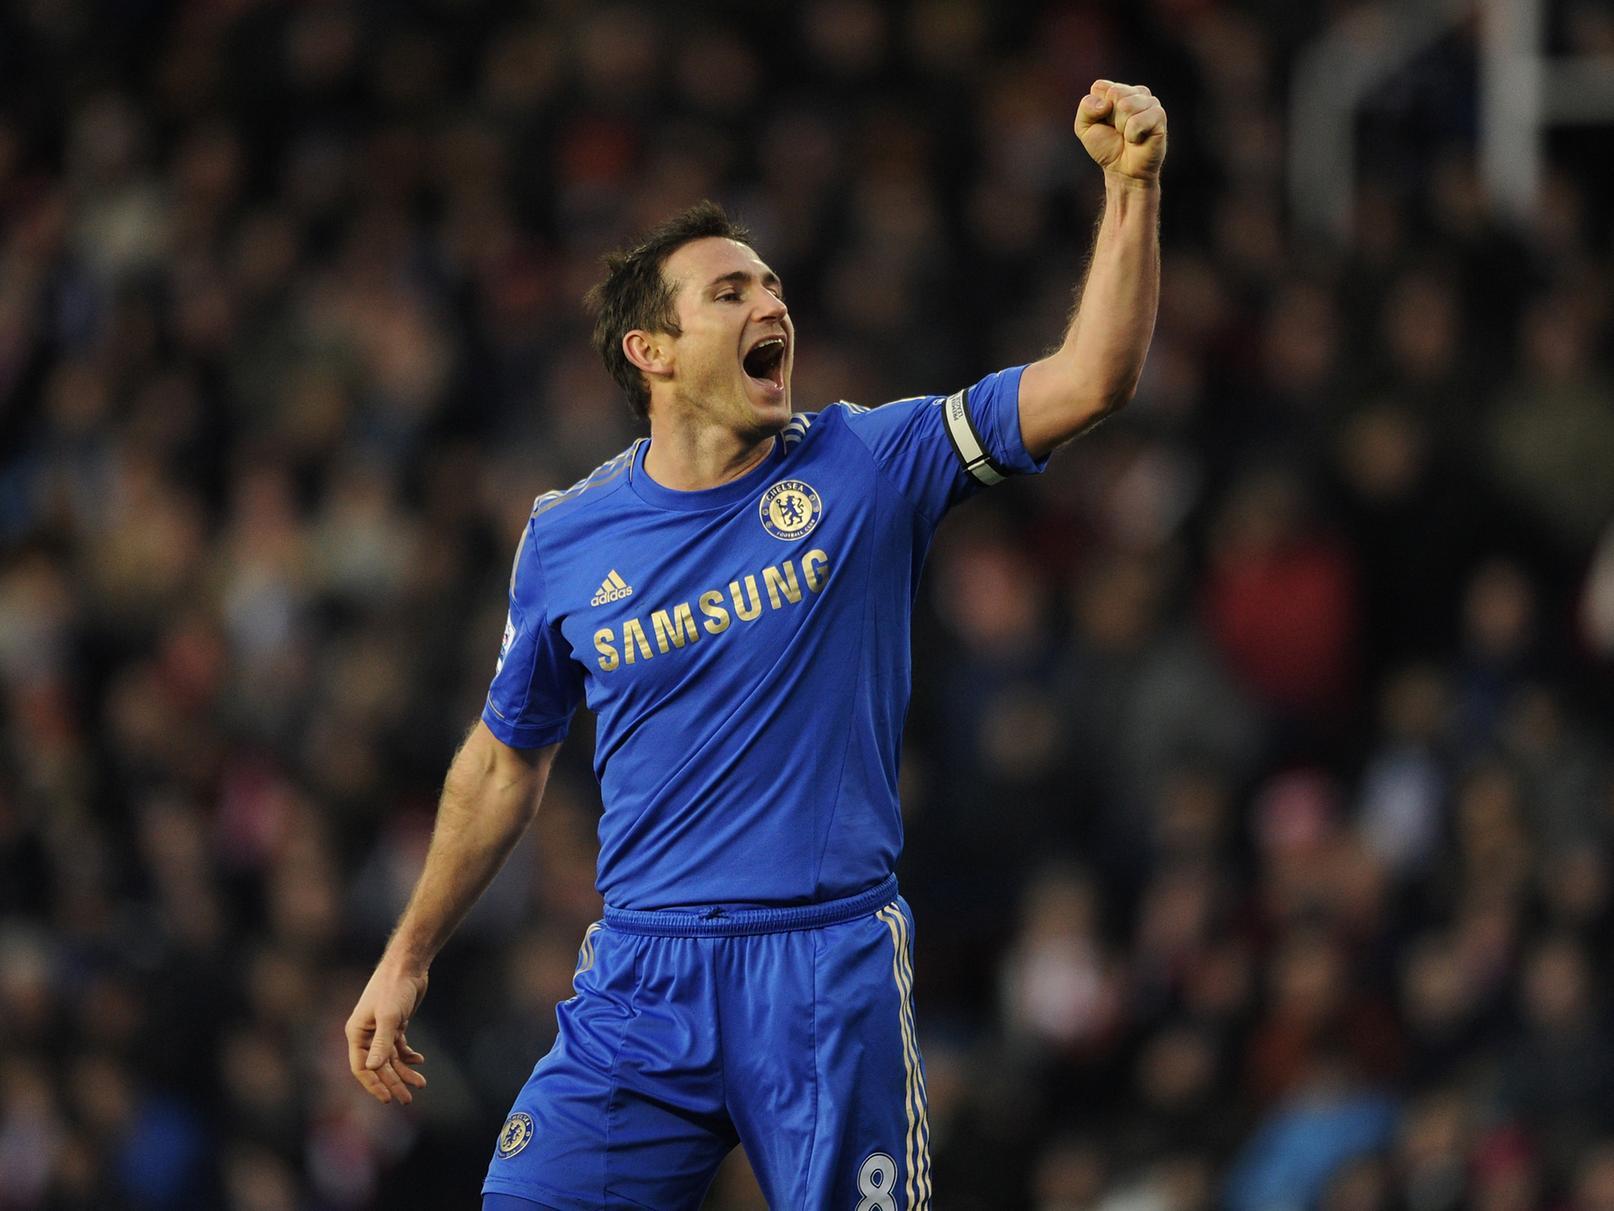 177 goals in 609 league games from midfield is a mighty fine haul.He was immense in his days as a Chelsea player, becoming an icon by the end of the 13 seasons spent at Stamford Bridge.